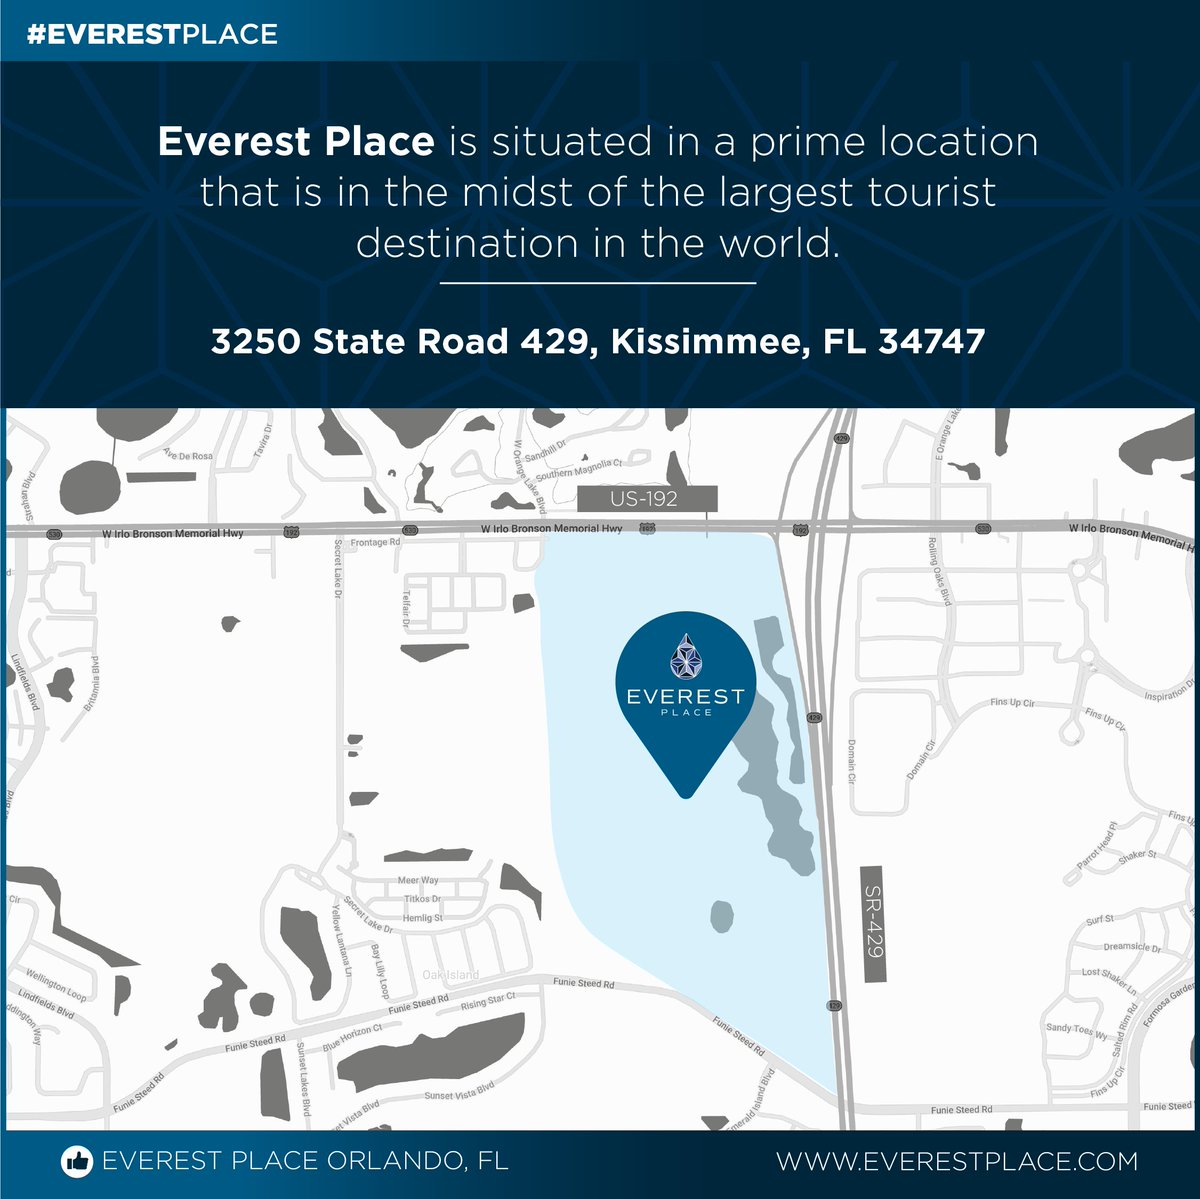 #EverestPlace is conveniently located at the intersection of US Route 192 highway and State Road 429 highway in Kissimmee, Florida. The Everest Place community is less than a 10-minute drive to all the Disney theme parks. everestplace.com